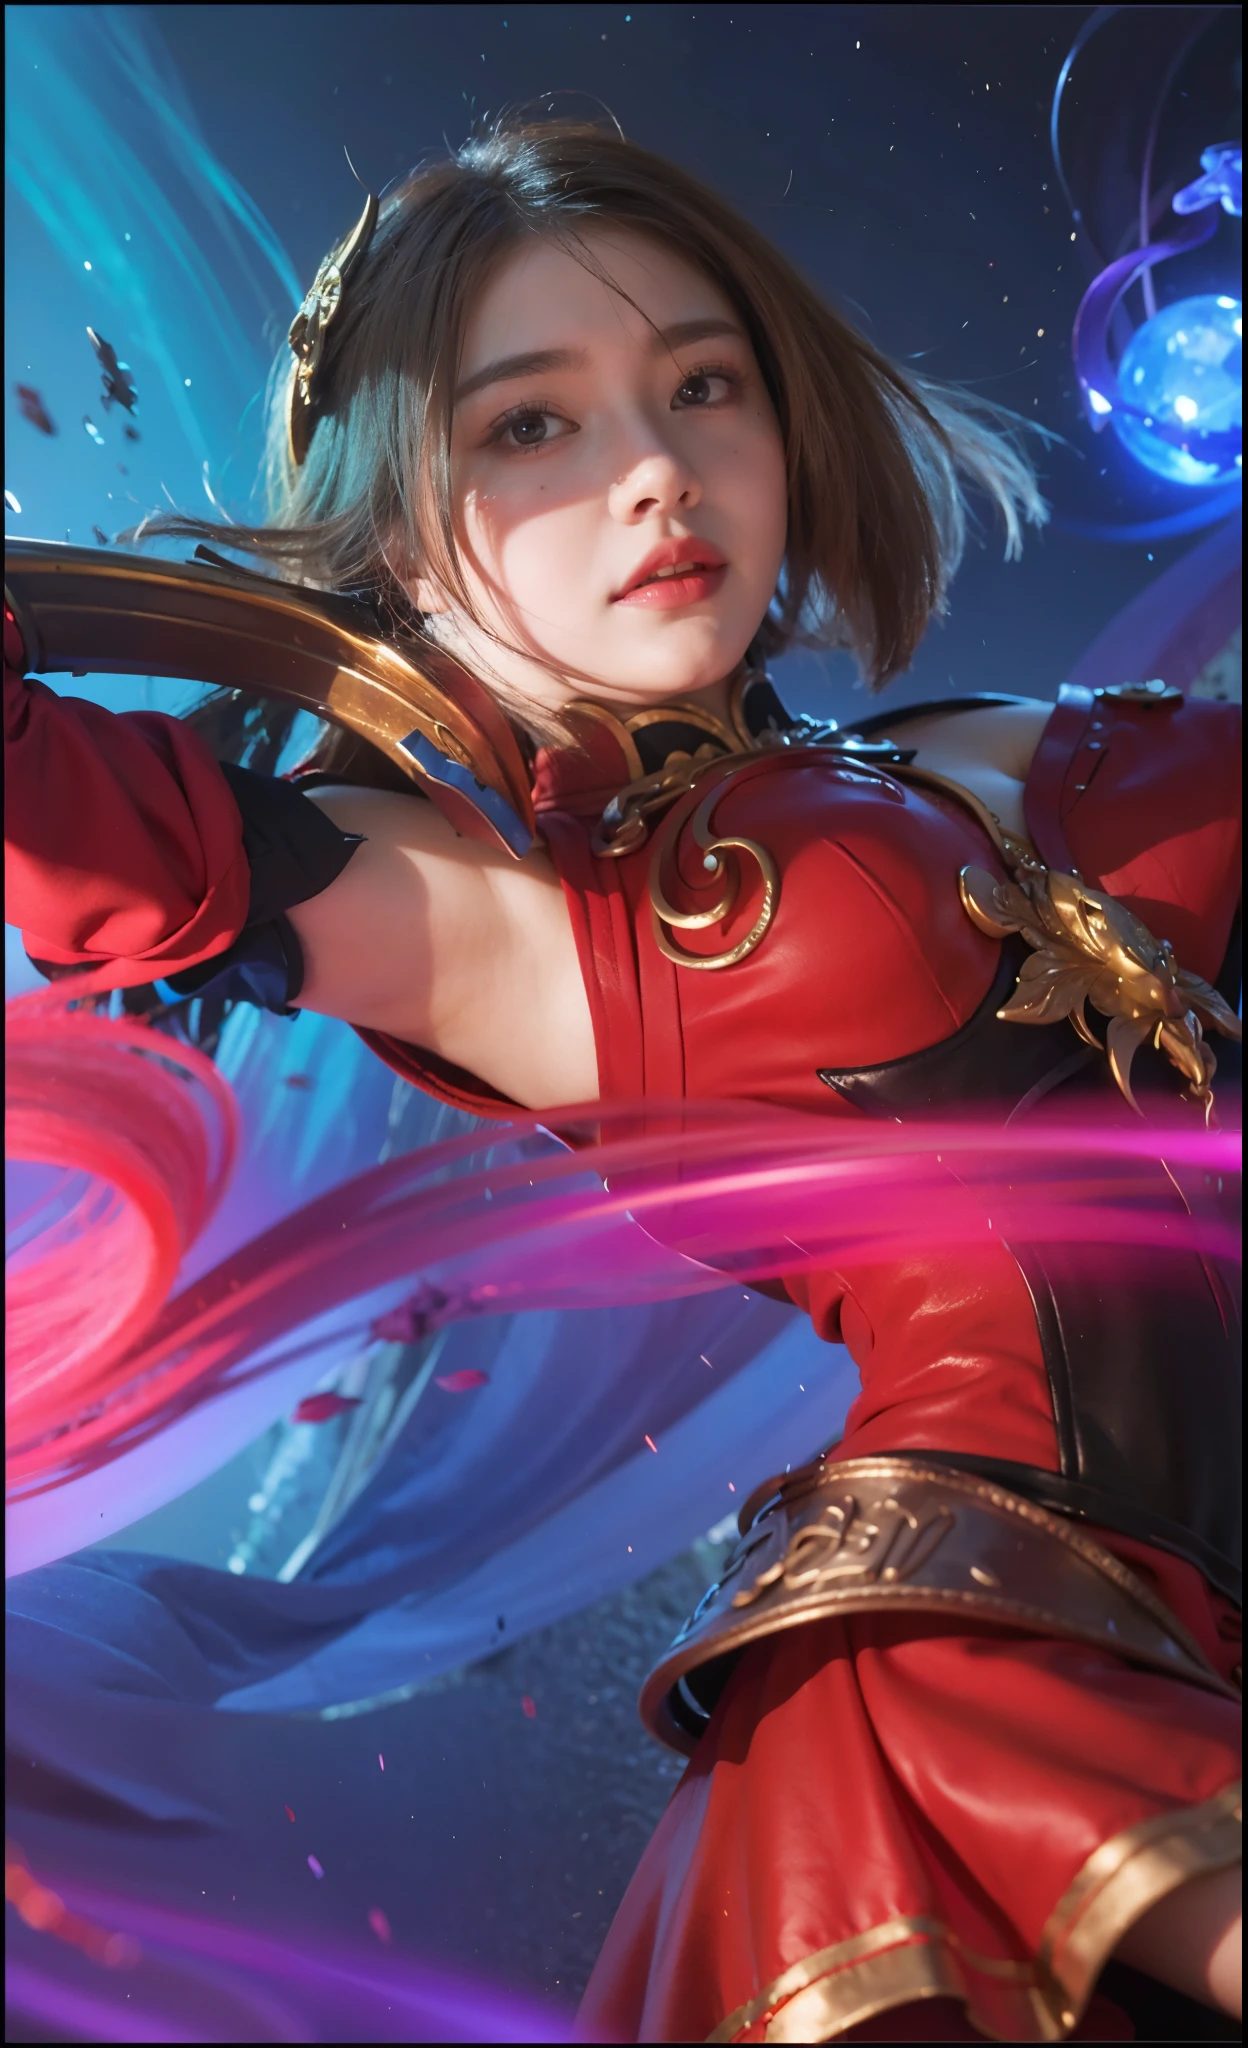 a close up of a woman wearing a red hood like a ruby ​​wearing a patch over one eye, shadowbringers cinematic, 4 k detail fantasy, a beautiful fantasy empress, game cg, xianxia fantasy, xianxia hero, 2. 5 d cgi anime fantasy artwork, cinematic goddess close shot, ruan jia and artgerm, wow 4 k detail fantasy, hyperdetailed fantasy character, smile beautifull.